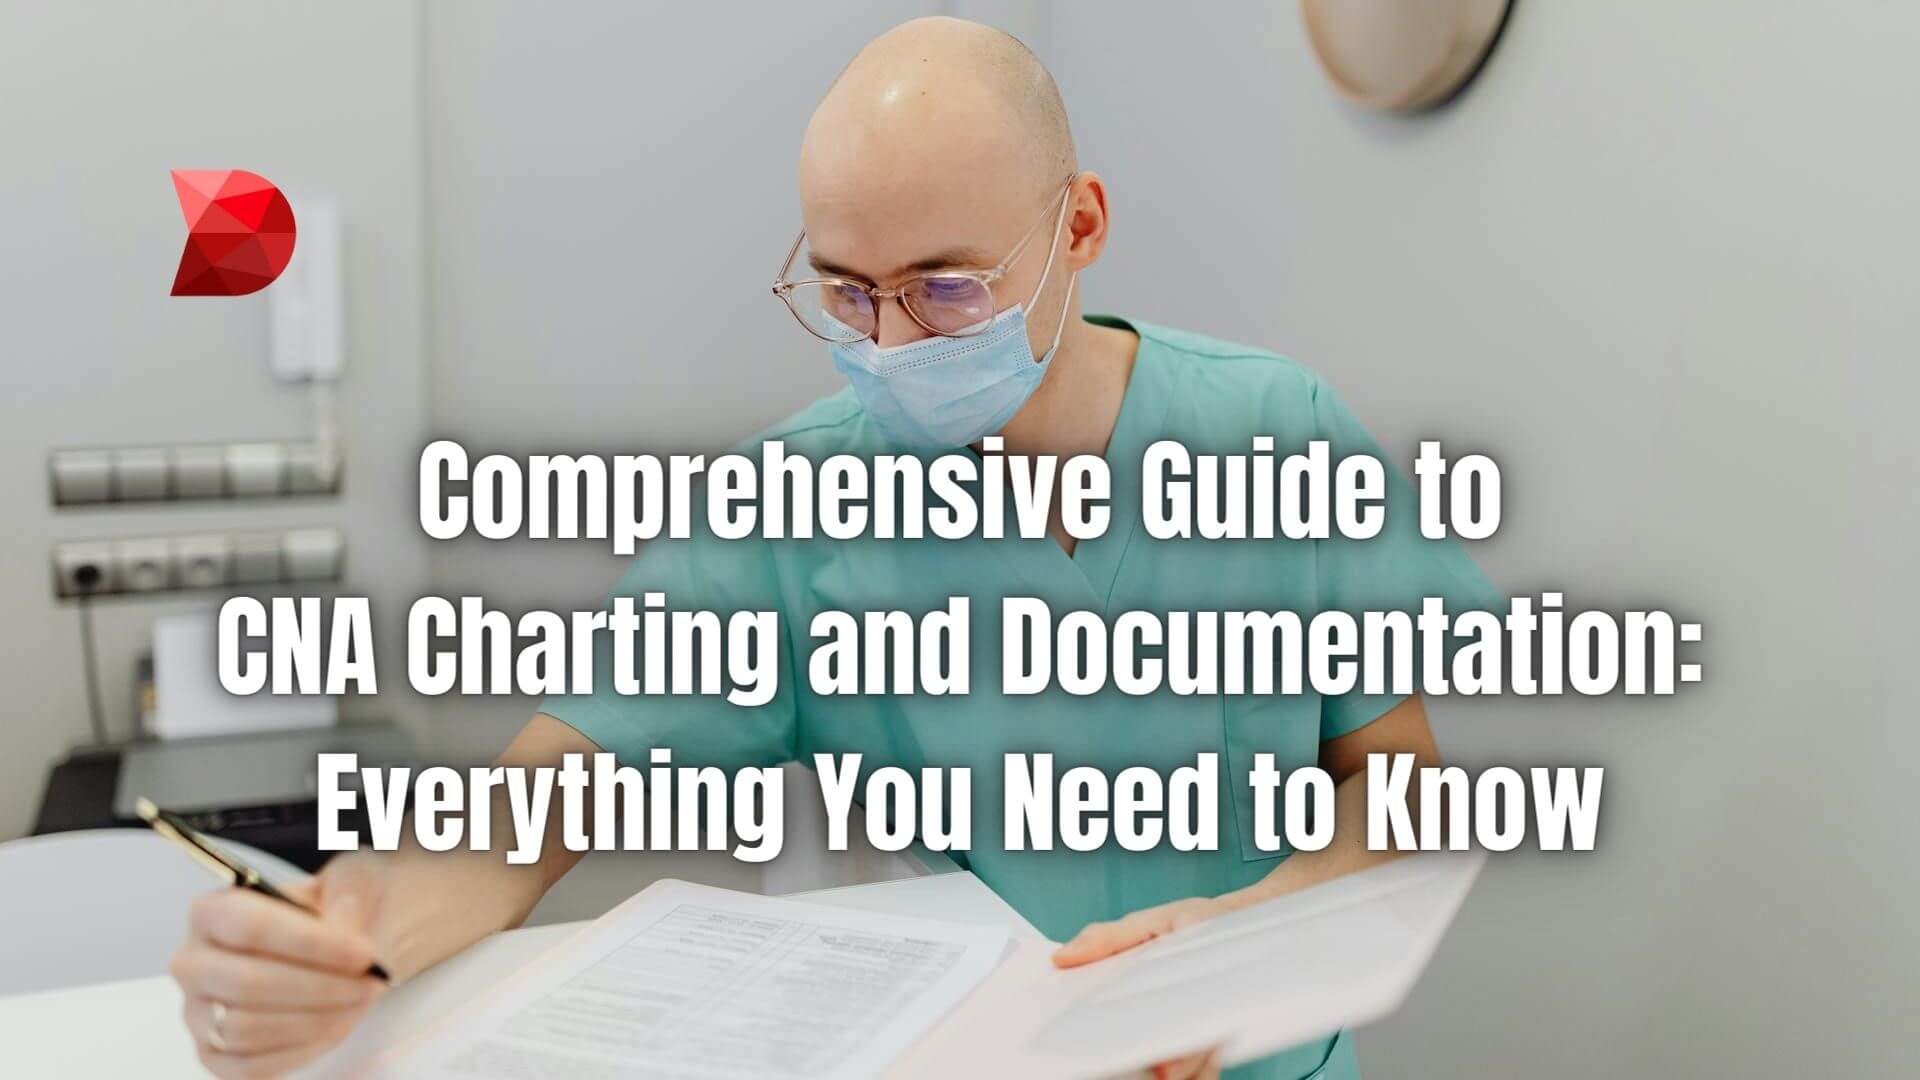 Unlock the secrets of CNA charting and documentation! Click here to learn best practices for accurate and efficient records.